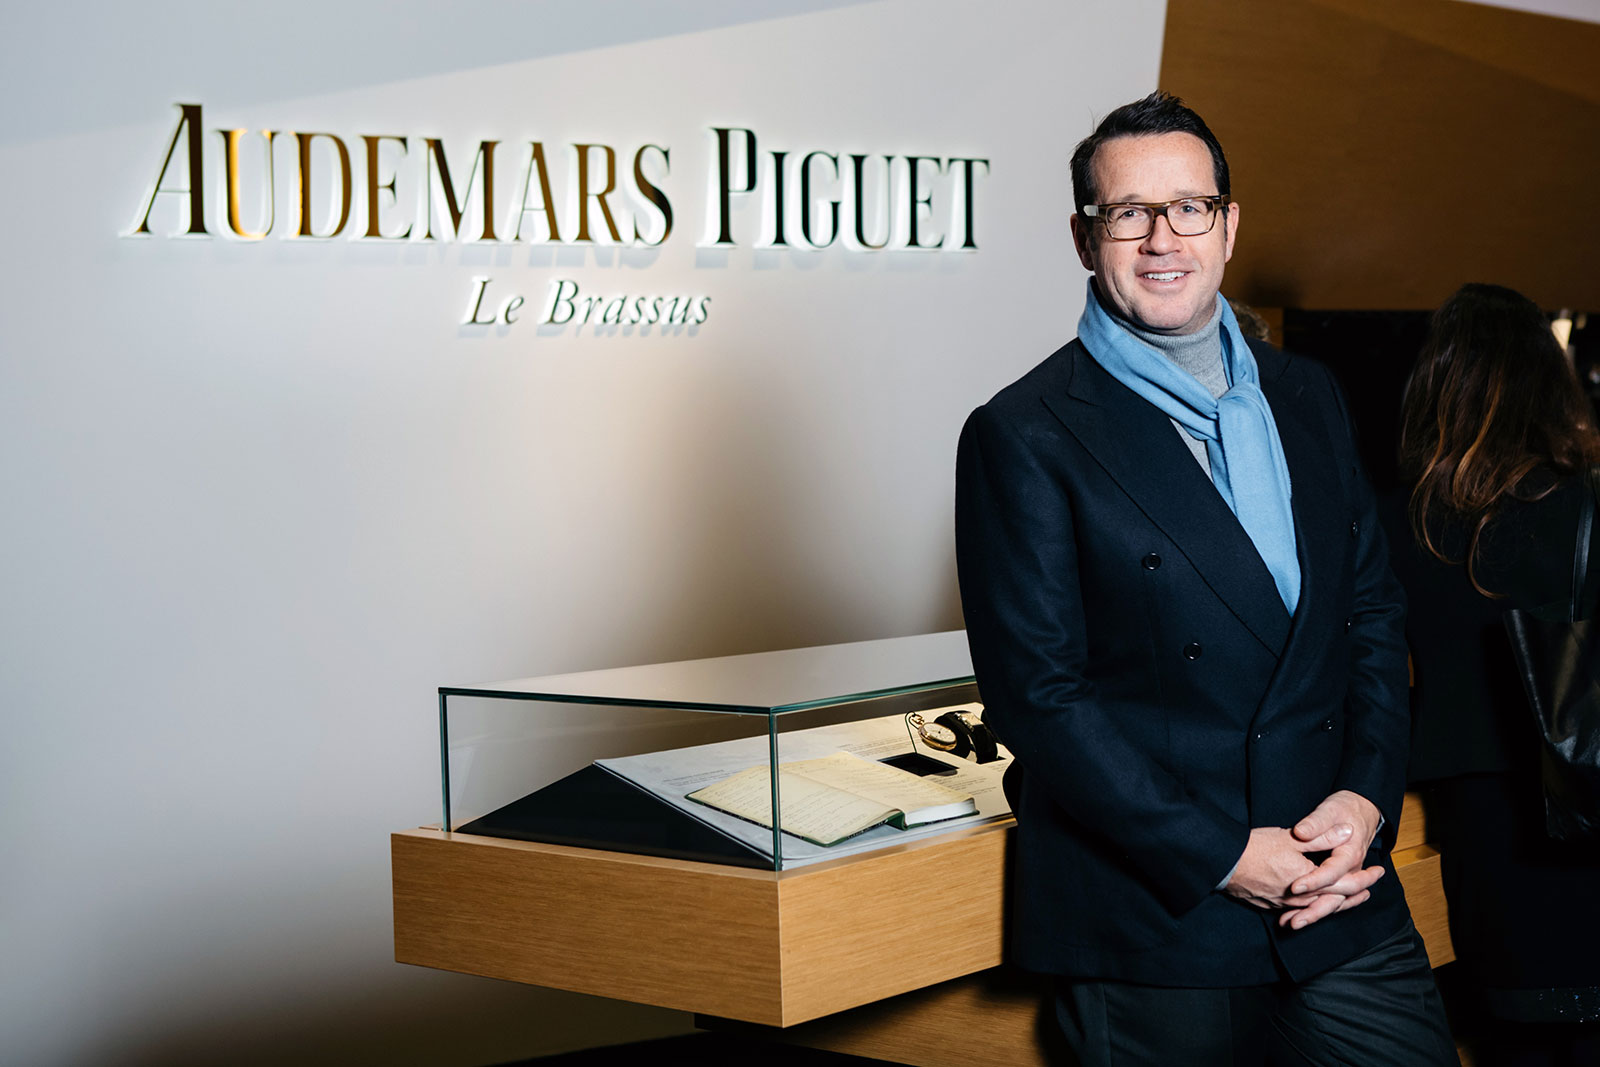 Yesterday I quickly met the new Audemars Piguet CEO François-Henry